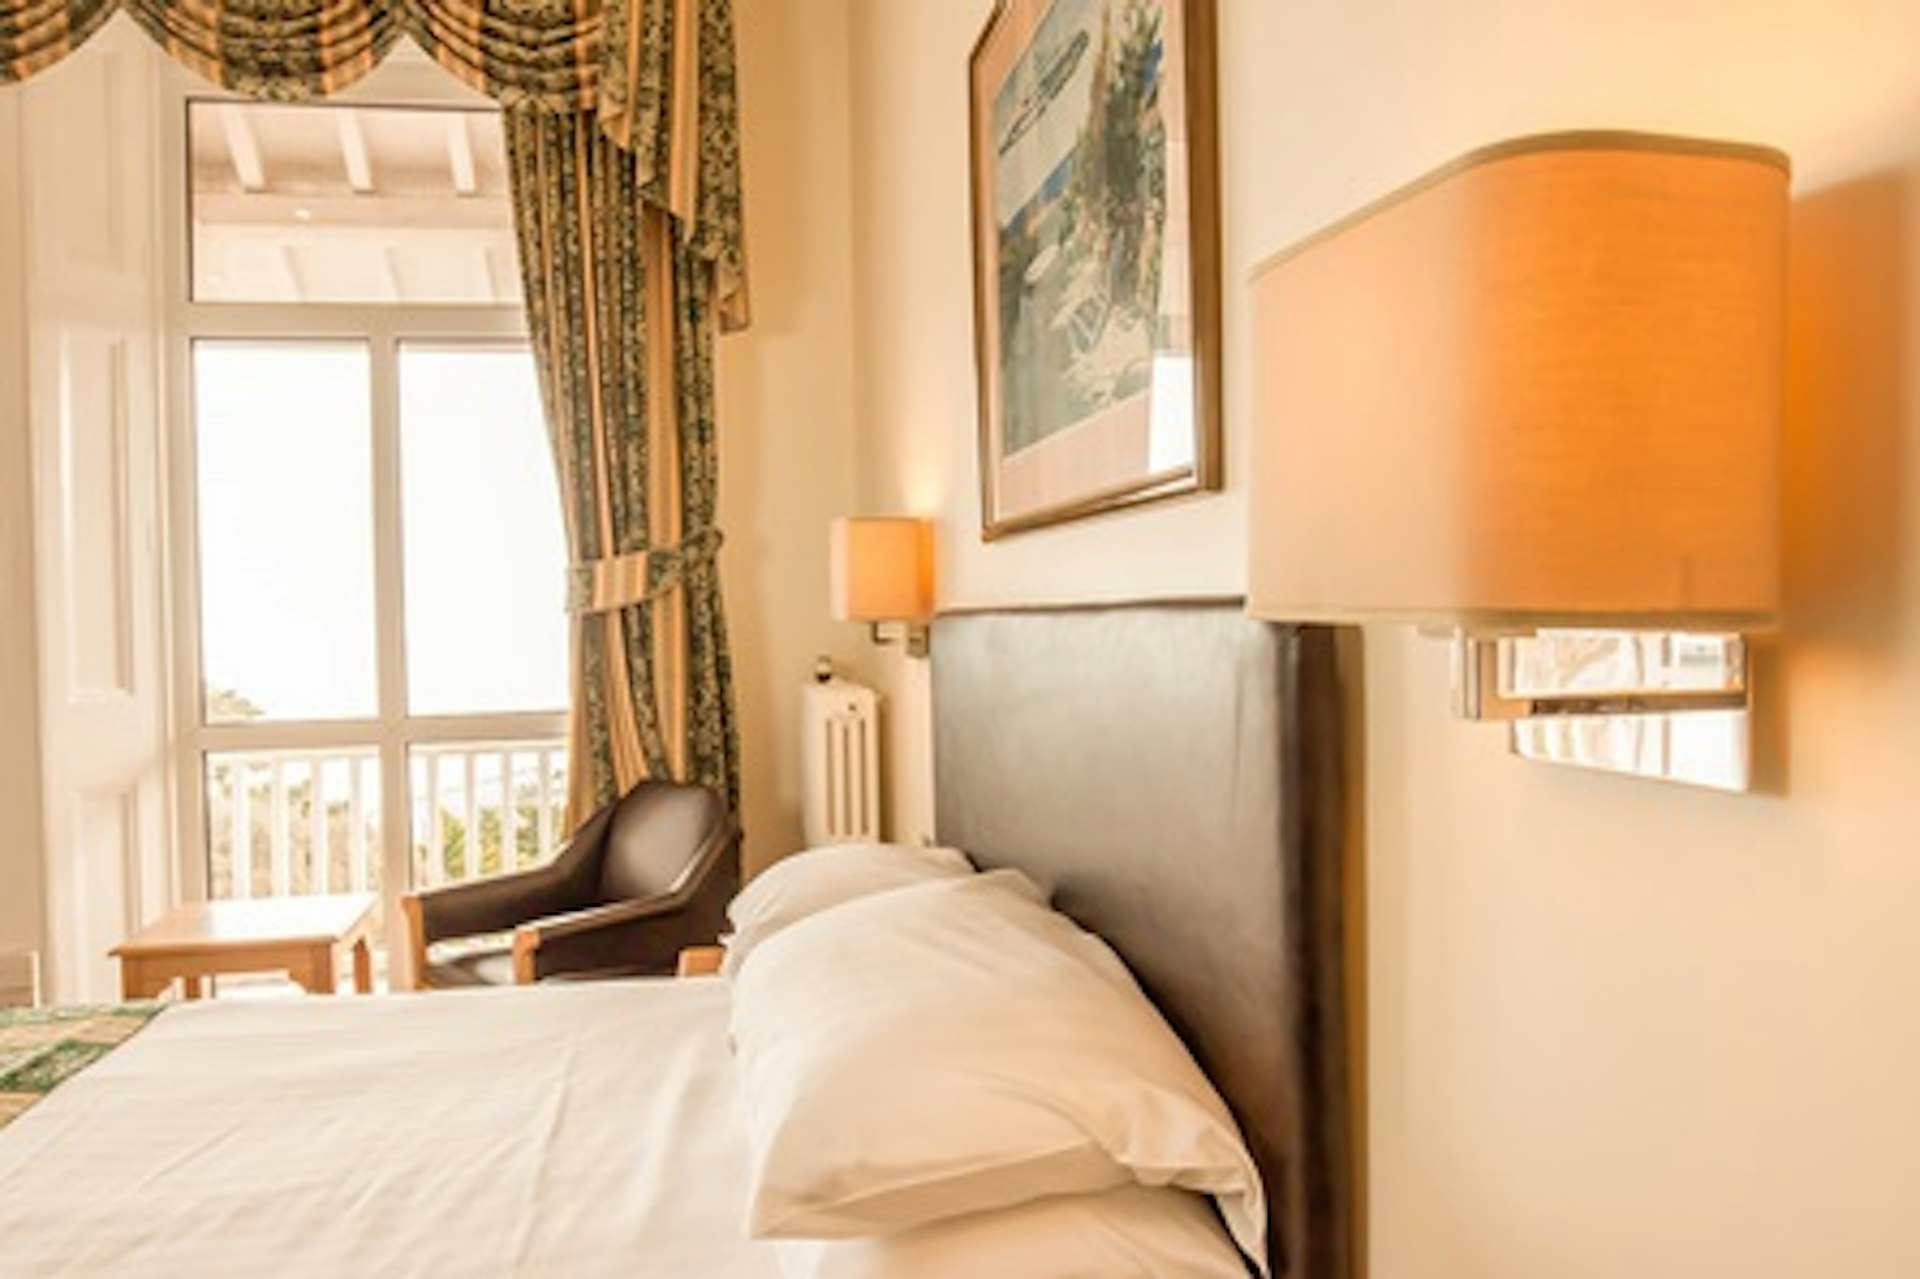 One Night Coastal Escape for Two at The Chine Hotel, Bournemouth 2